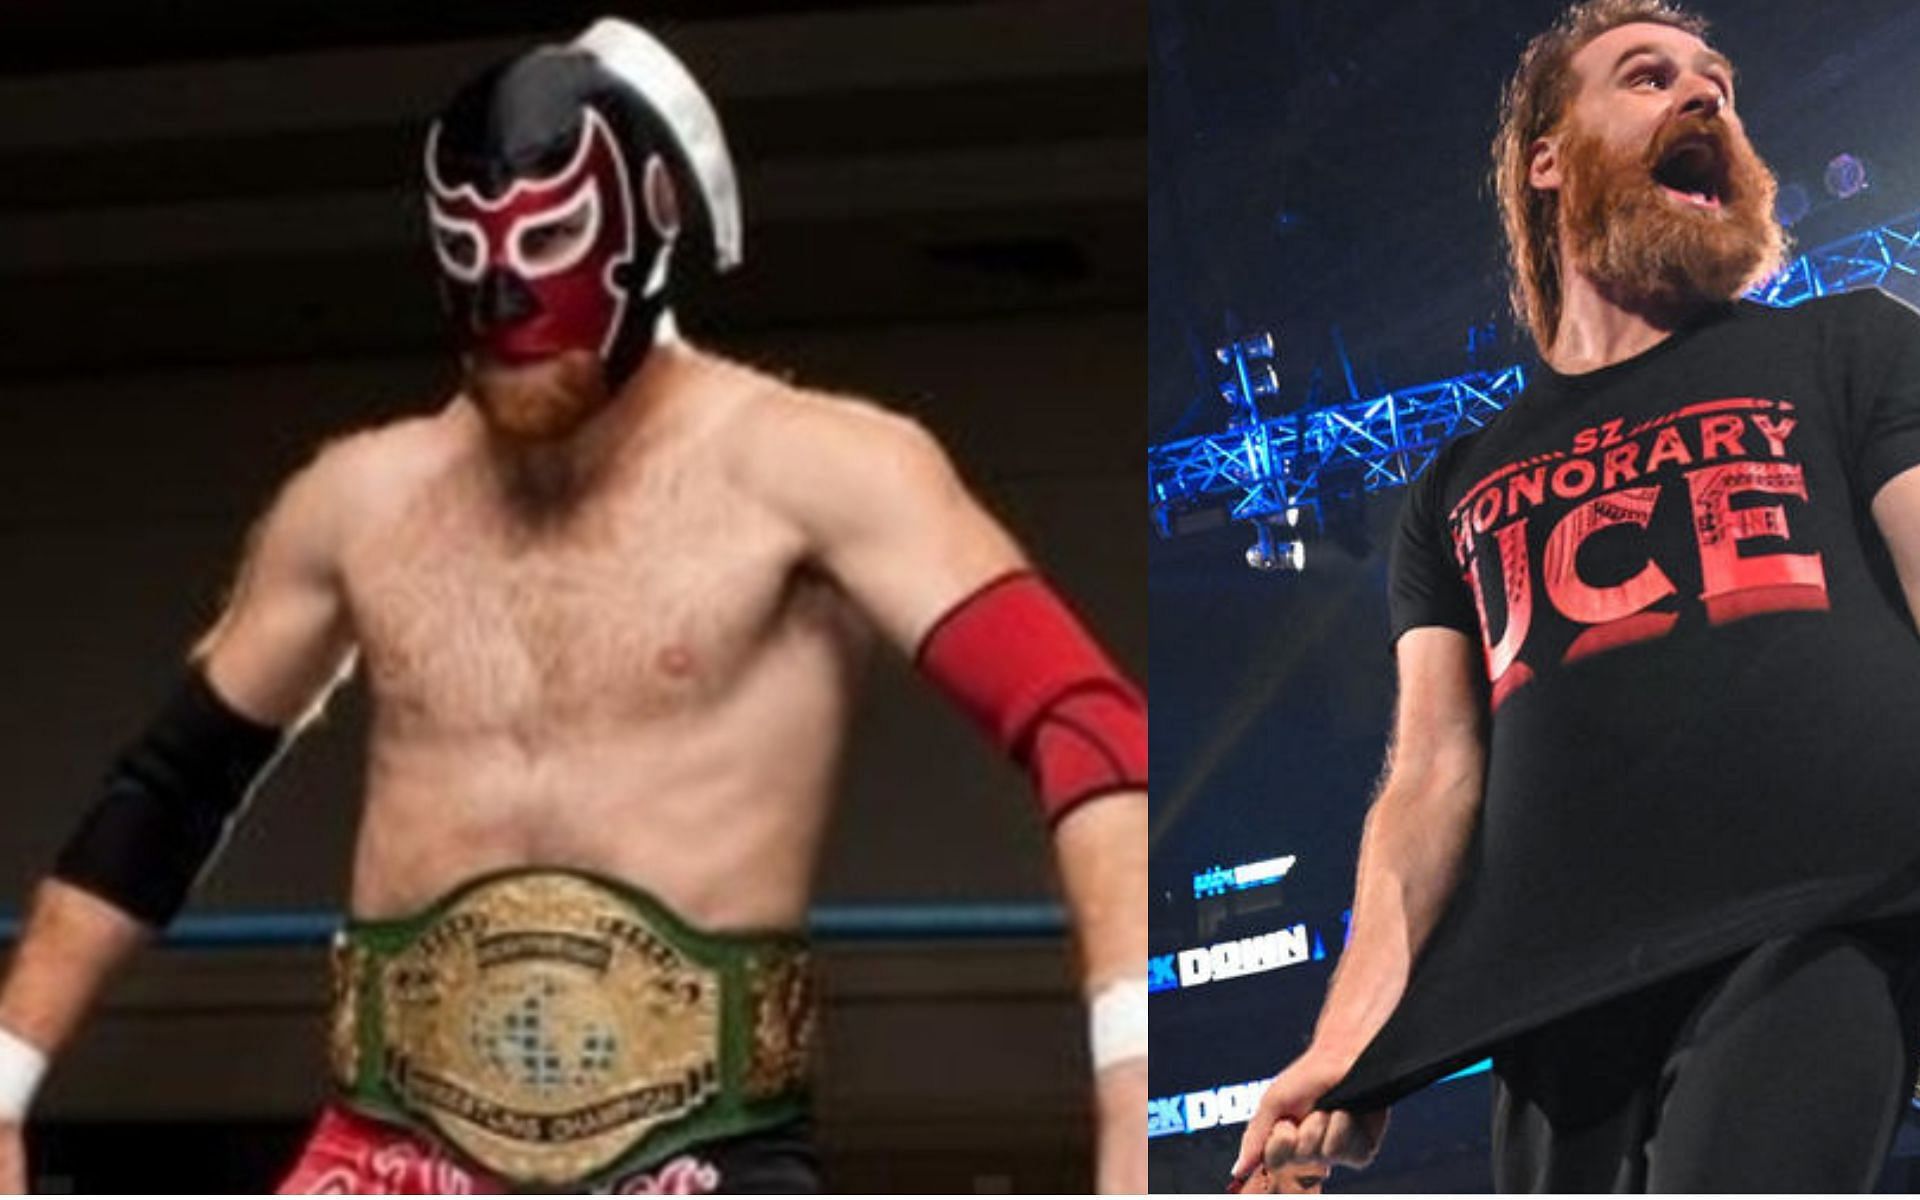 The honorary Uce (El Generico) during his time as PWG Champion